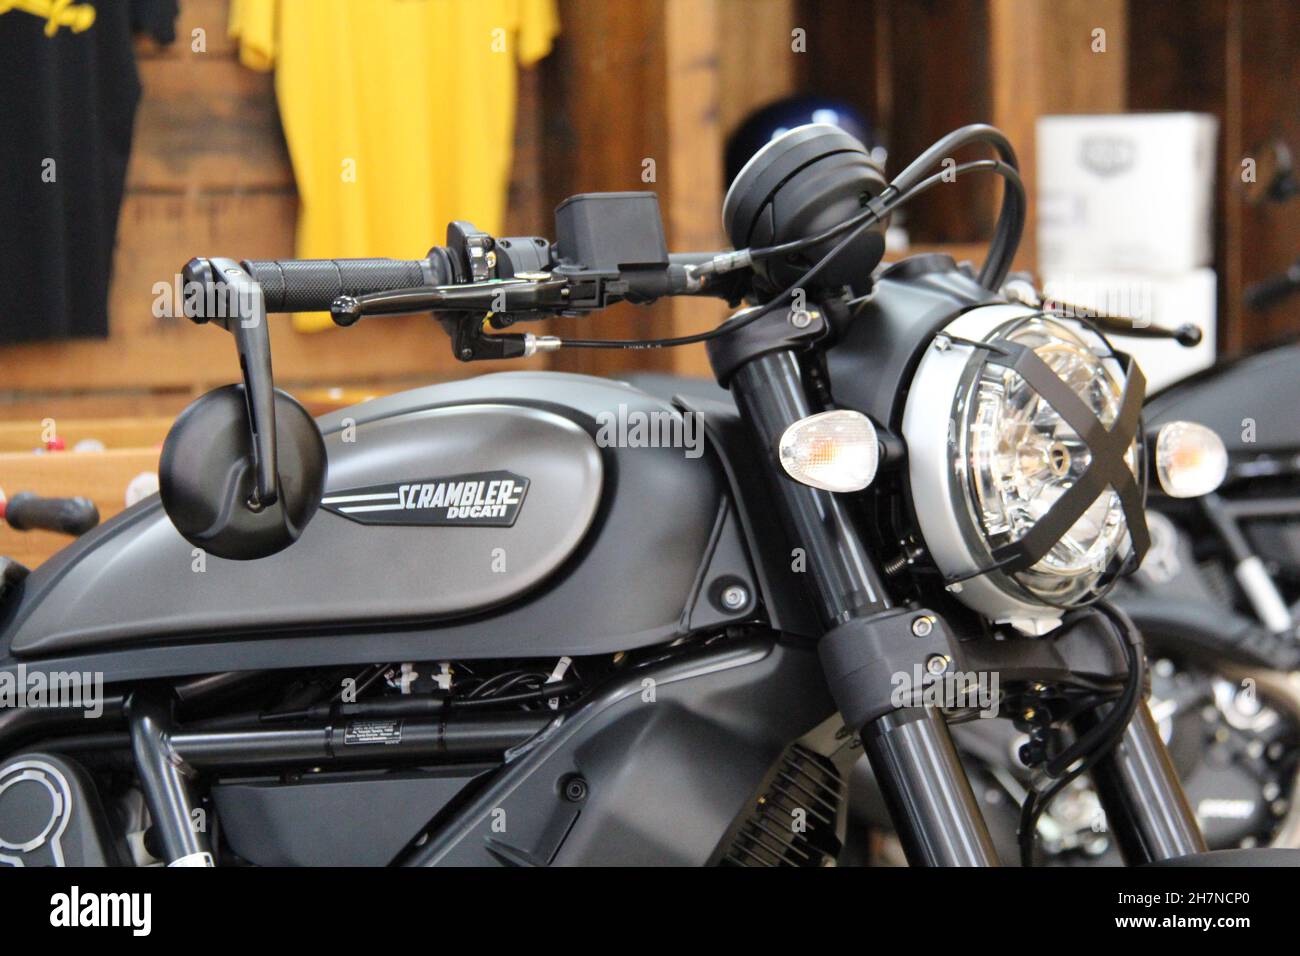 Ducati Scrambler motorcycle: Icon model, with custom paint in black,  handlebars and headlamp, panoramic view, isolated. São Paulo Stock Photo -  Alamy